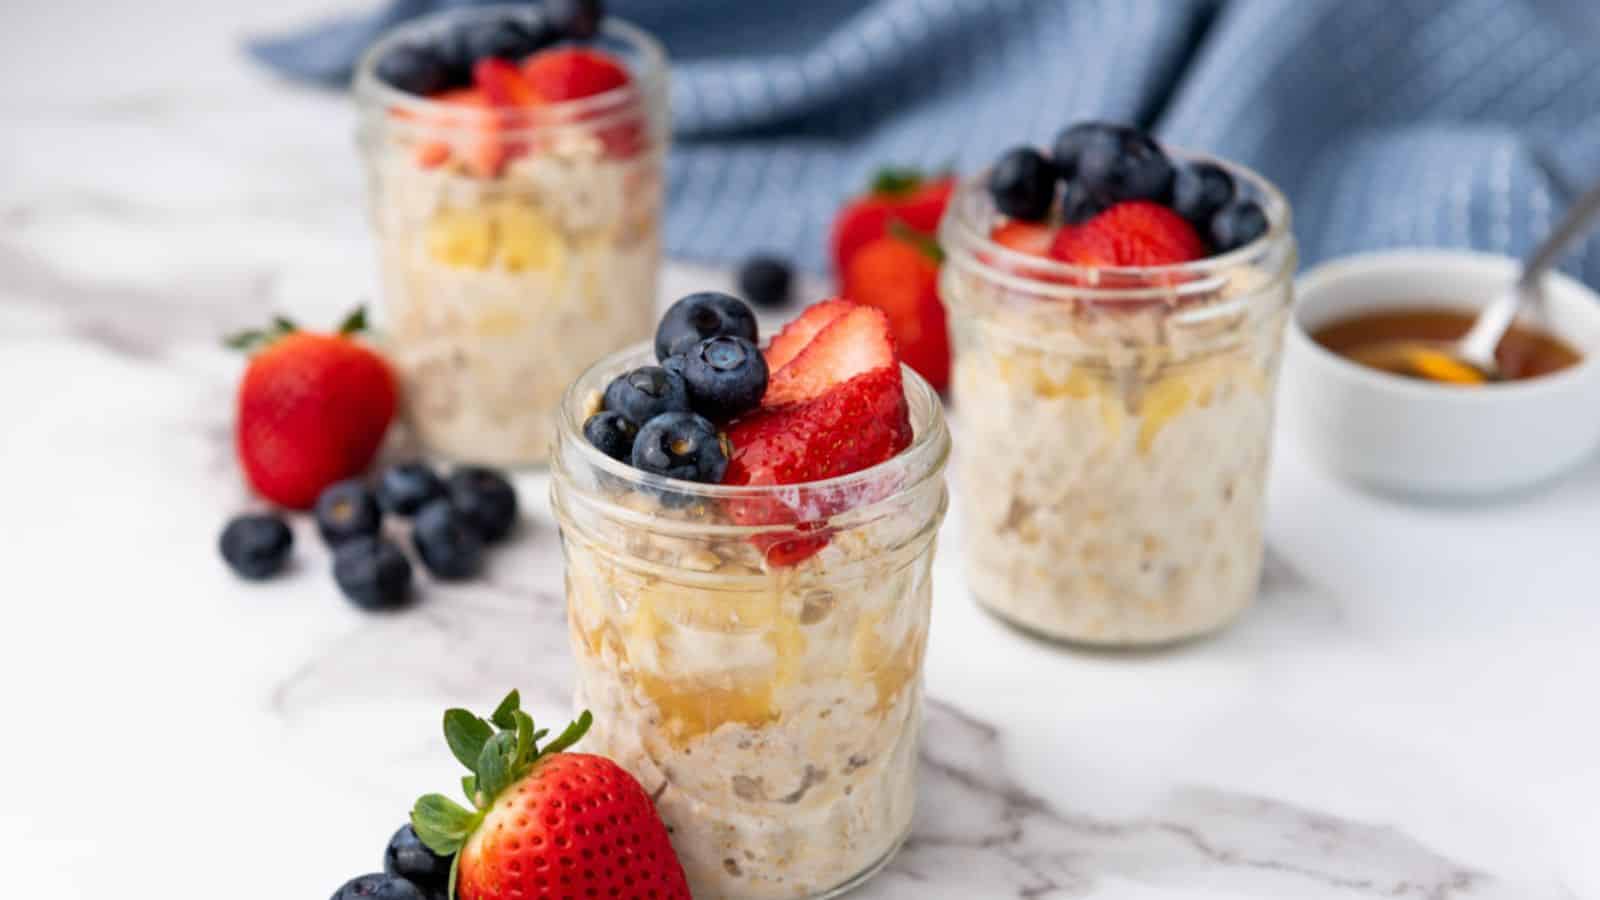 <p>Feeling sleepy? Try our Overnight Vanilla Oats for a quick pick-me-up! These oats are a lifesaver for busy mornings. Just mix them up the night before and wake up to a delicious, ready-to-eat breakfast. They’re a guaranteed kid-approved breakfast win that will turn those frowns upside down.<br><strong>Get the Recipe: </strong><a href="https://twocityvegans.com/vegan-overnight-vanilla-oats/?utm_source=msn&utm_medium=page&utm_campaign=msn" rel="noopener">Overnight Vanilla Oats</a></p>